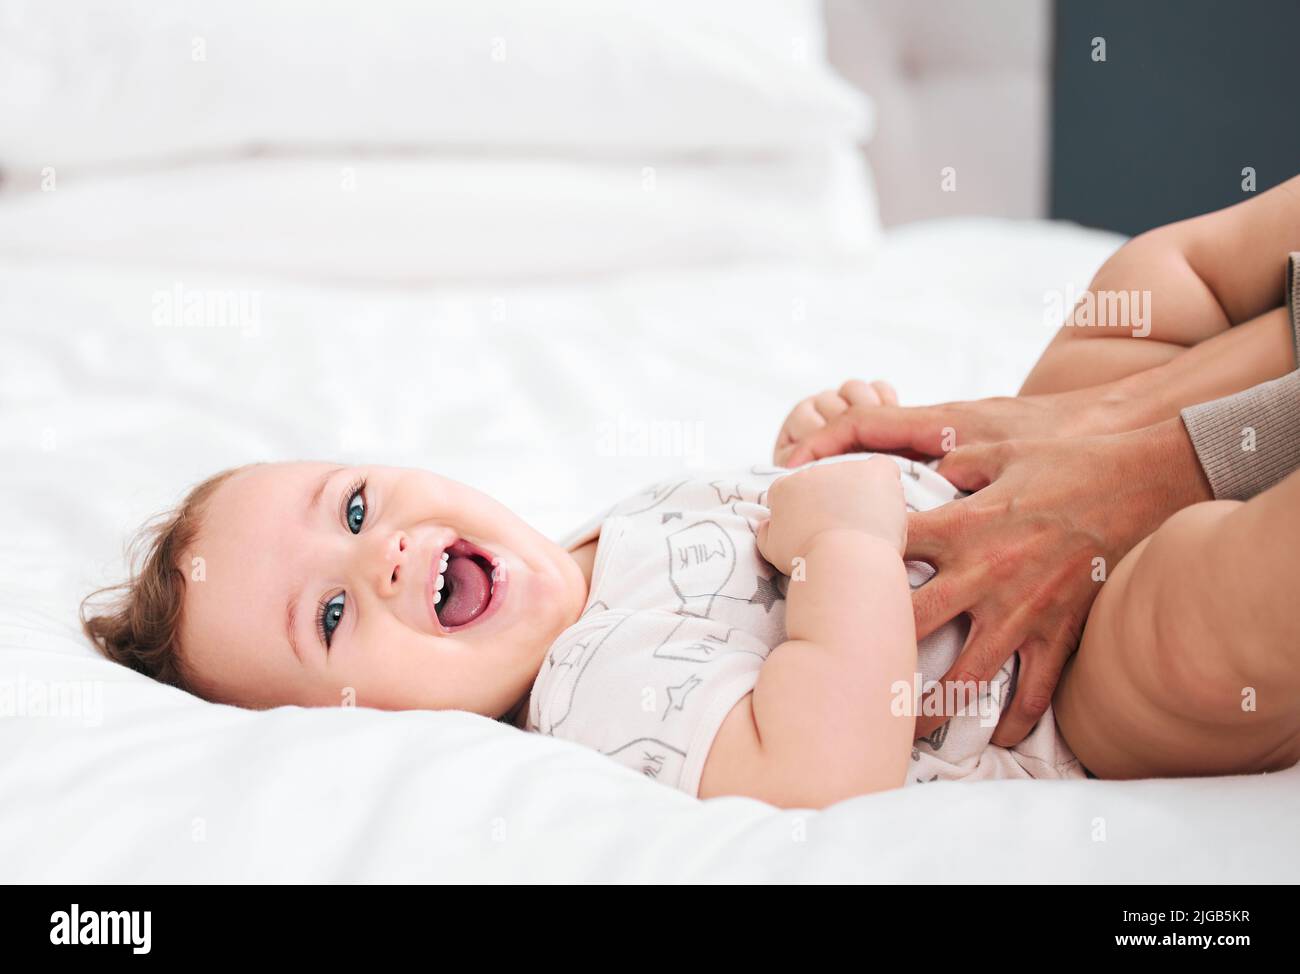 That tickles. a woman bonding with her adorable baby boy at home. Stock Photo